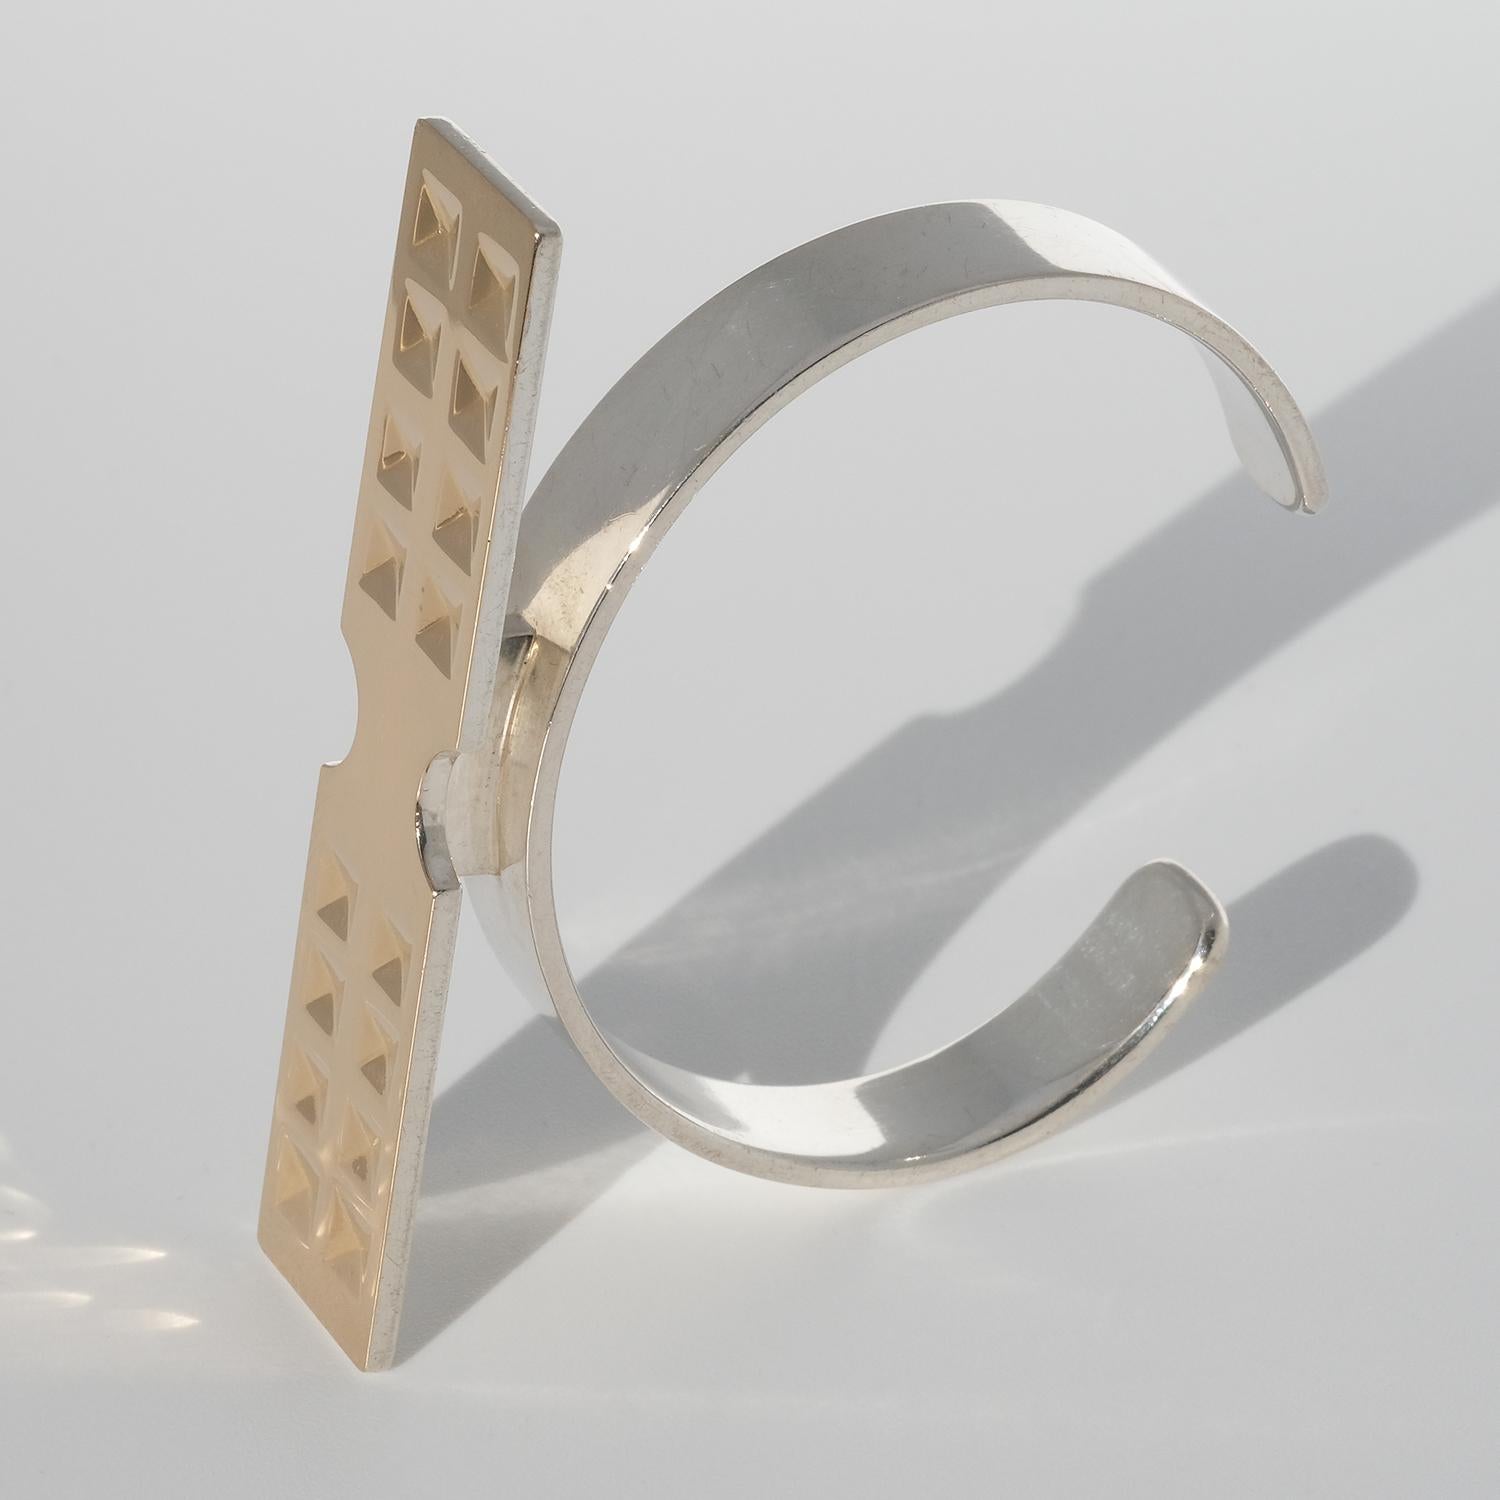 This sterling silver cuff bracelet has gold on its upper part. The fixed cuff bracelet is excellent with its firm, waffled adornment and geometrically curved arms. This bracelet sums up all the fabulous things about the eighties.

The cuff bracelet